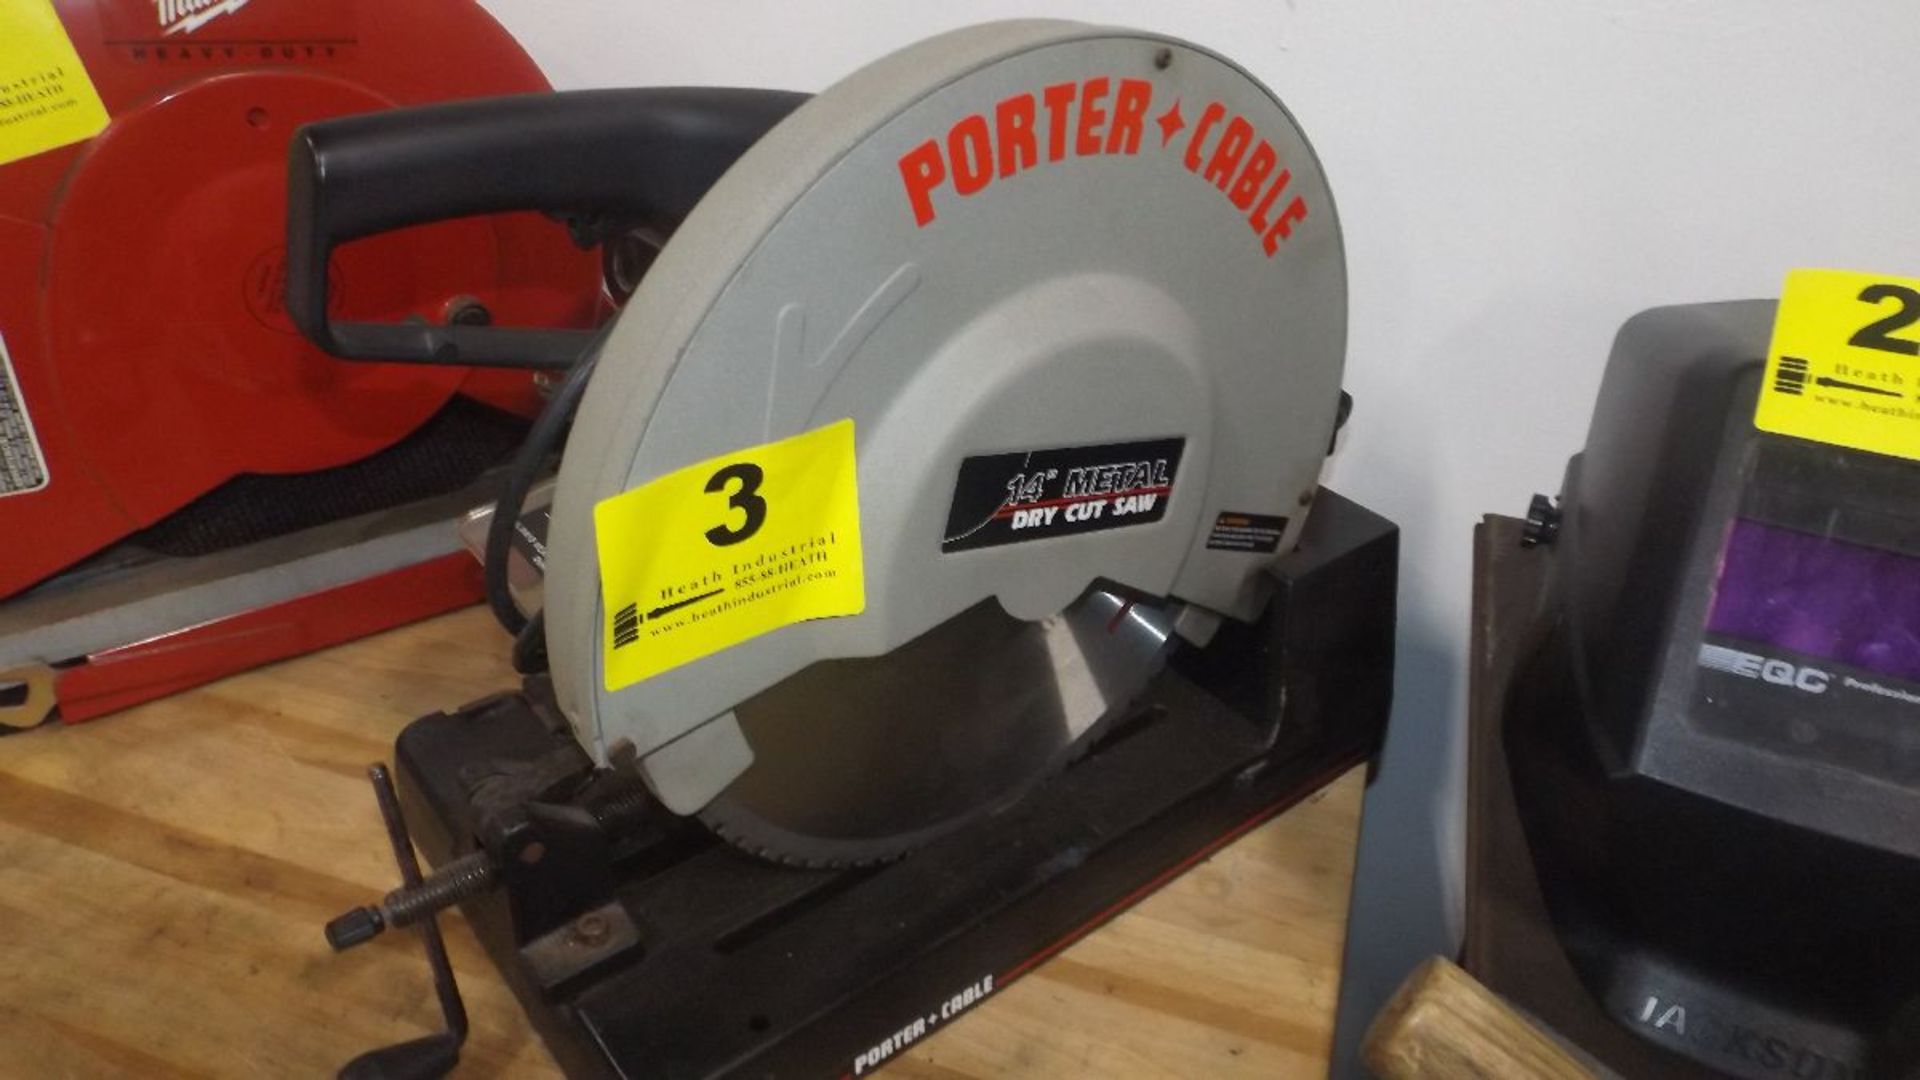 PORTER CABLE MODEL 1410, 14'' DRY CUT SAW